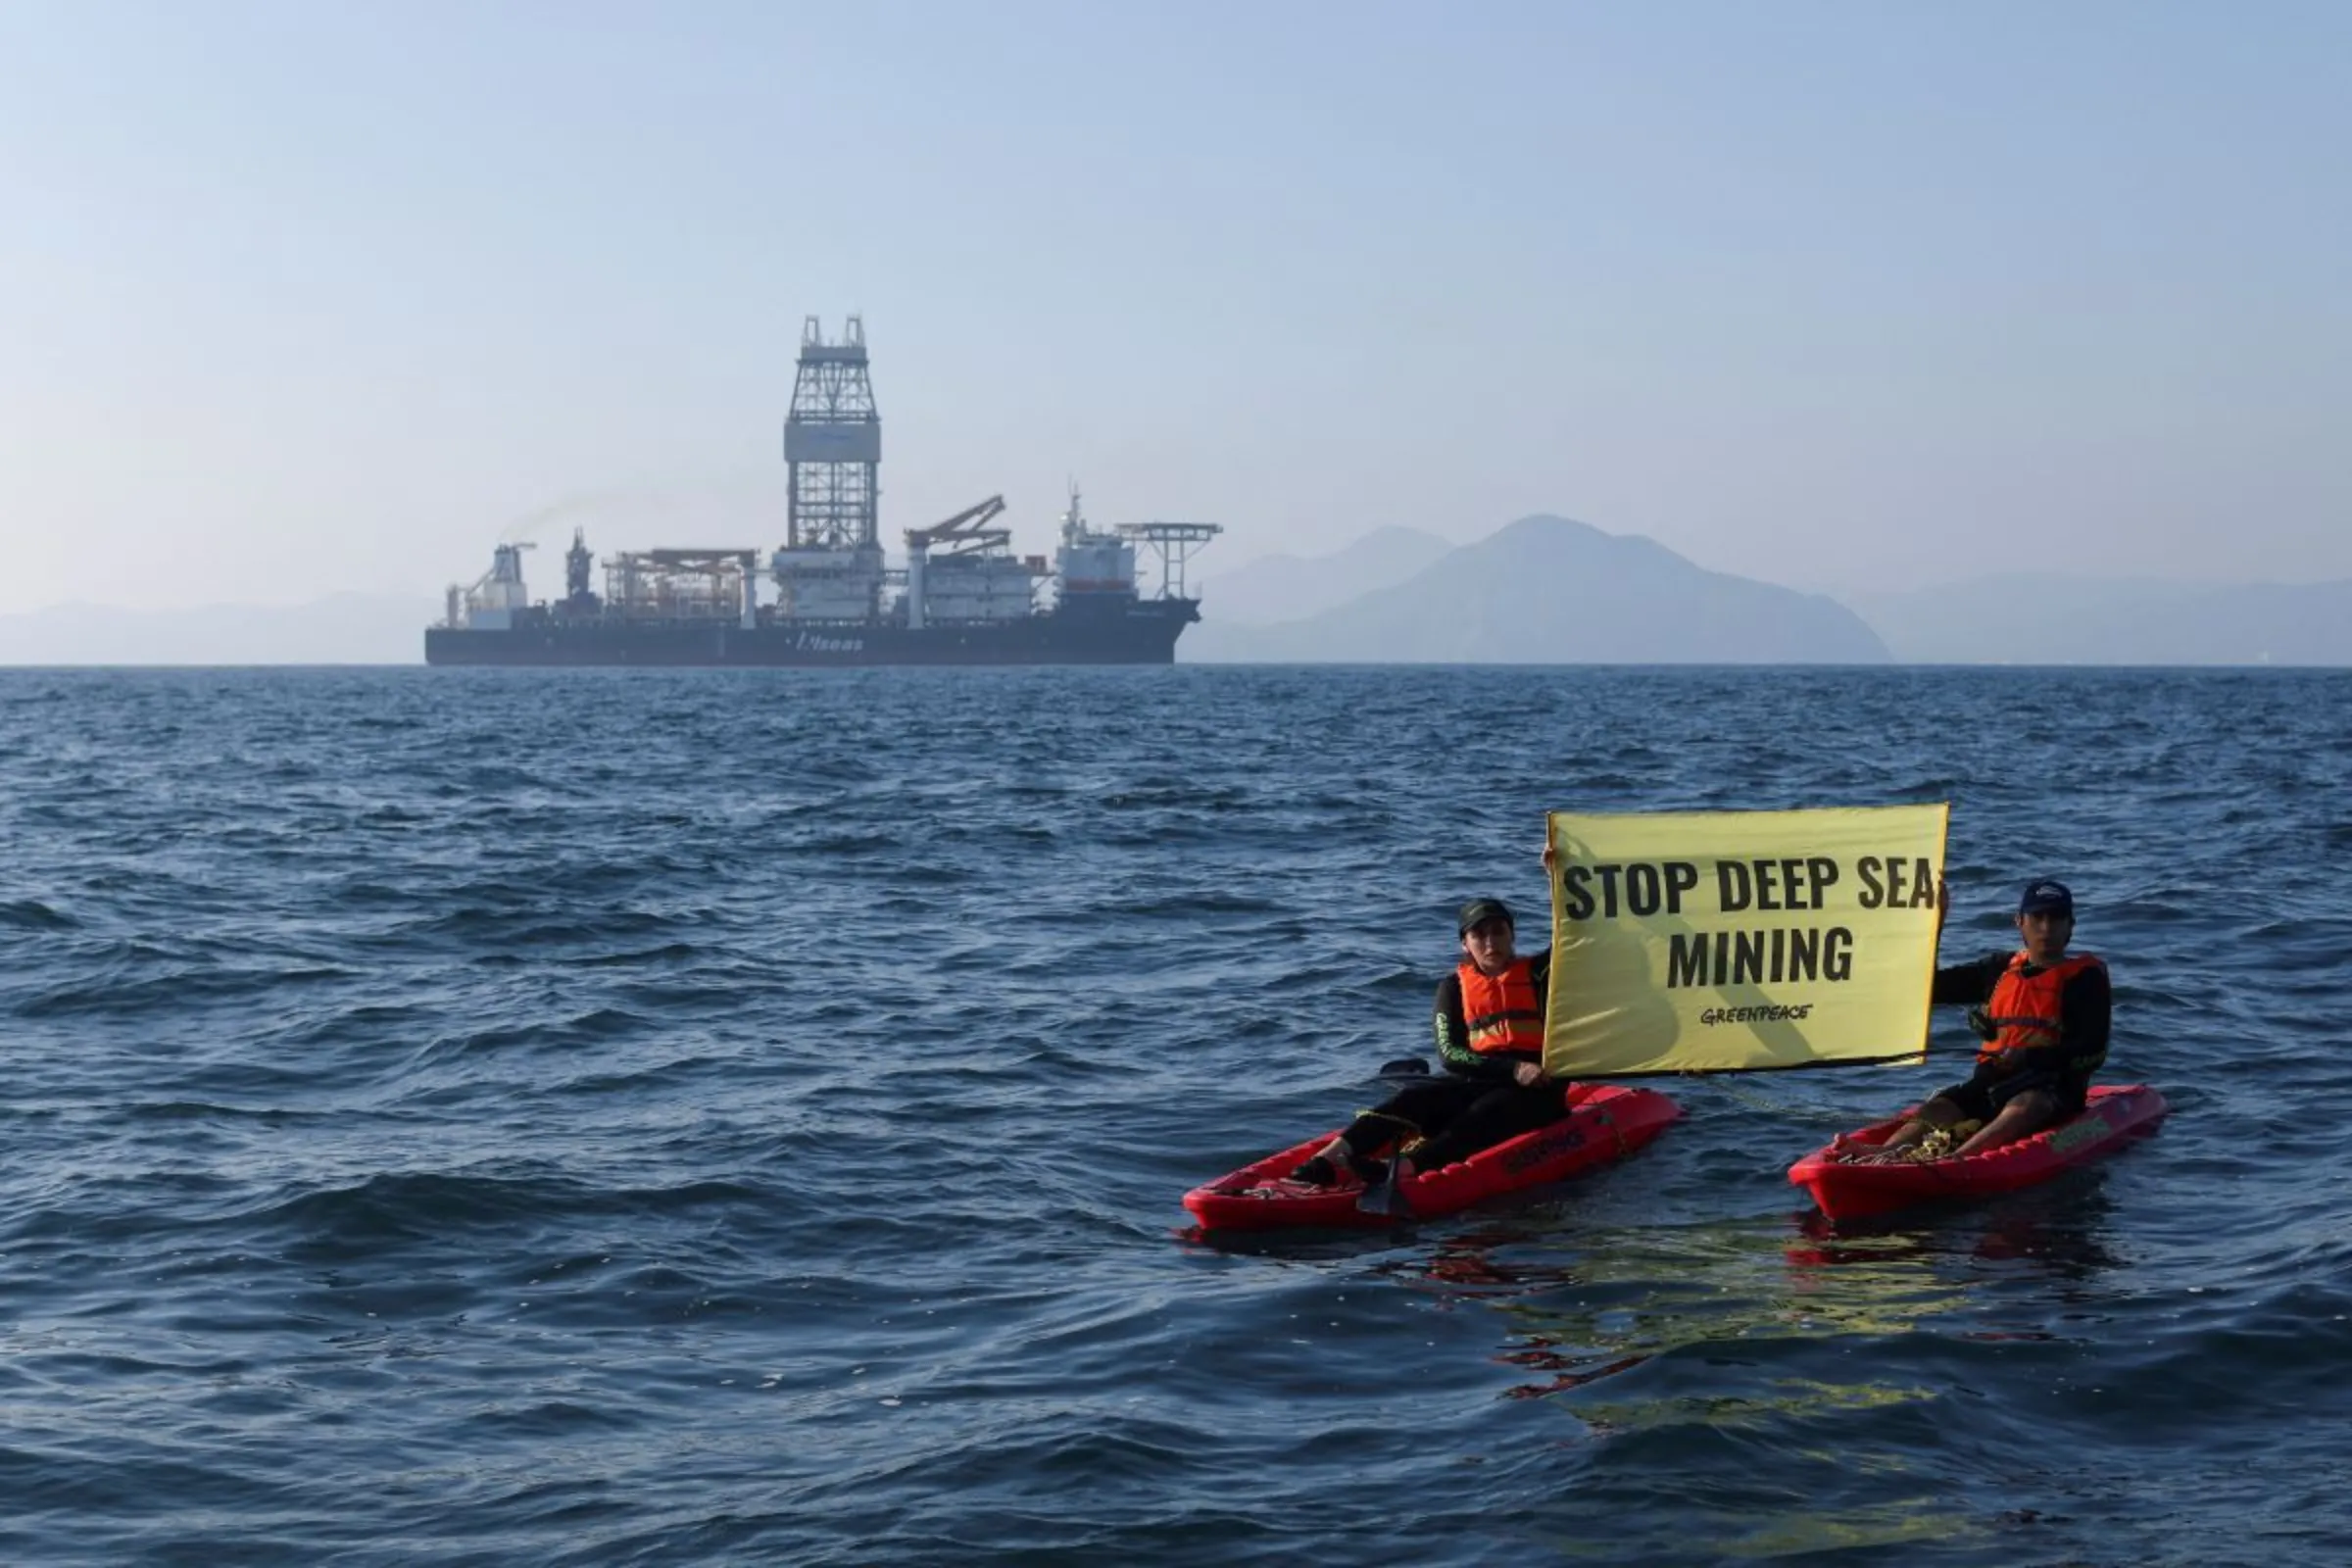 Greenpeace activists from New Zealand and Mexico confront the deep sea mining vessel Hidden Gem off the coast of Manzanillo, Mexico November 16, 2022. REUTERS/Gustavo Graf